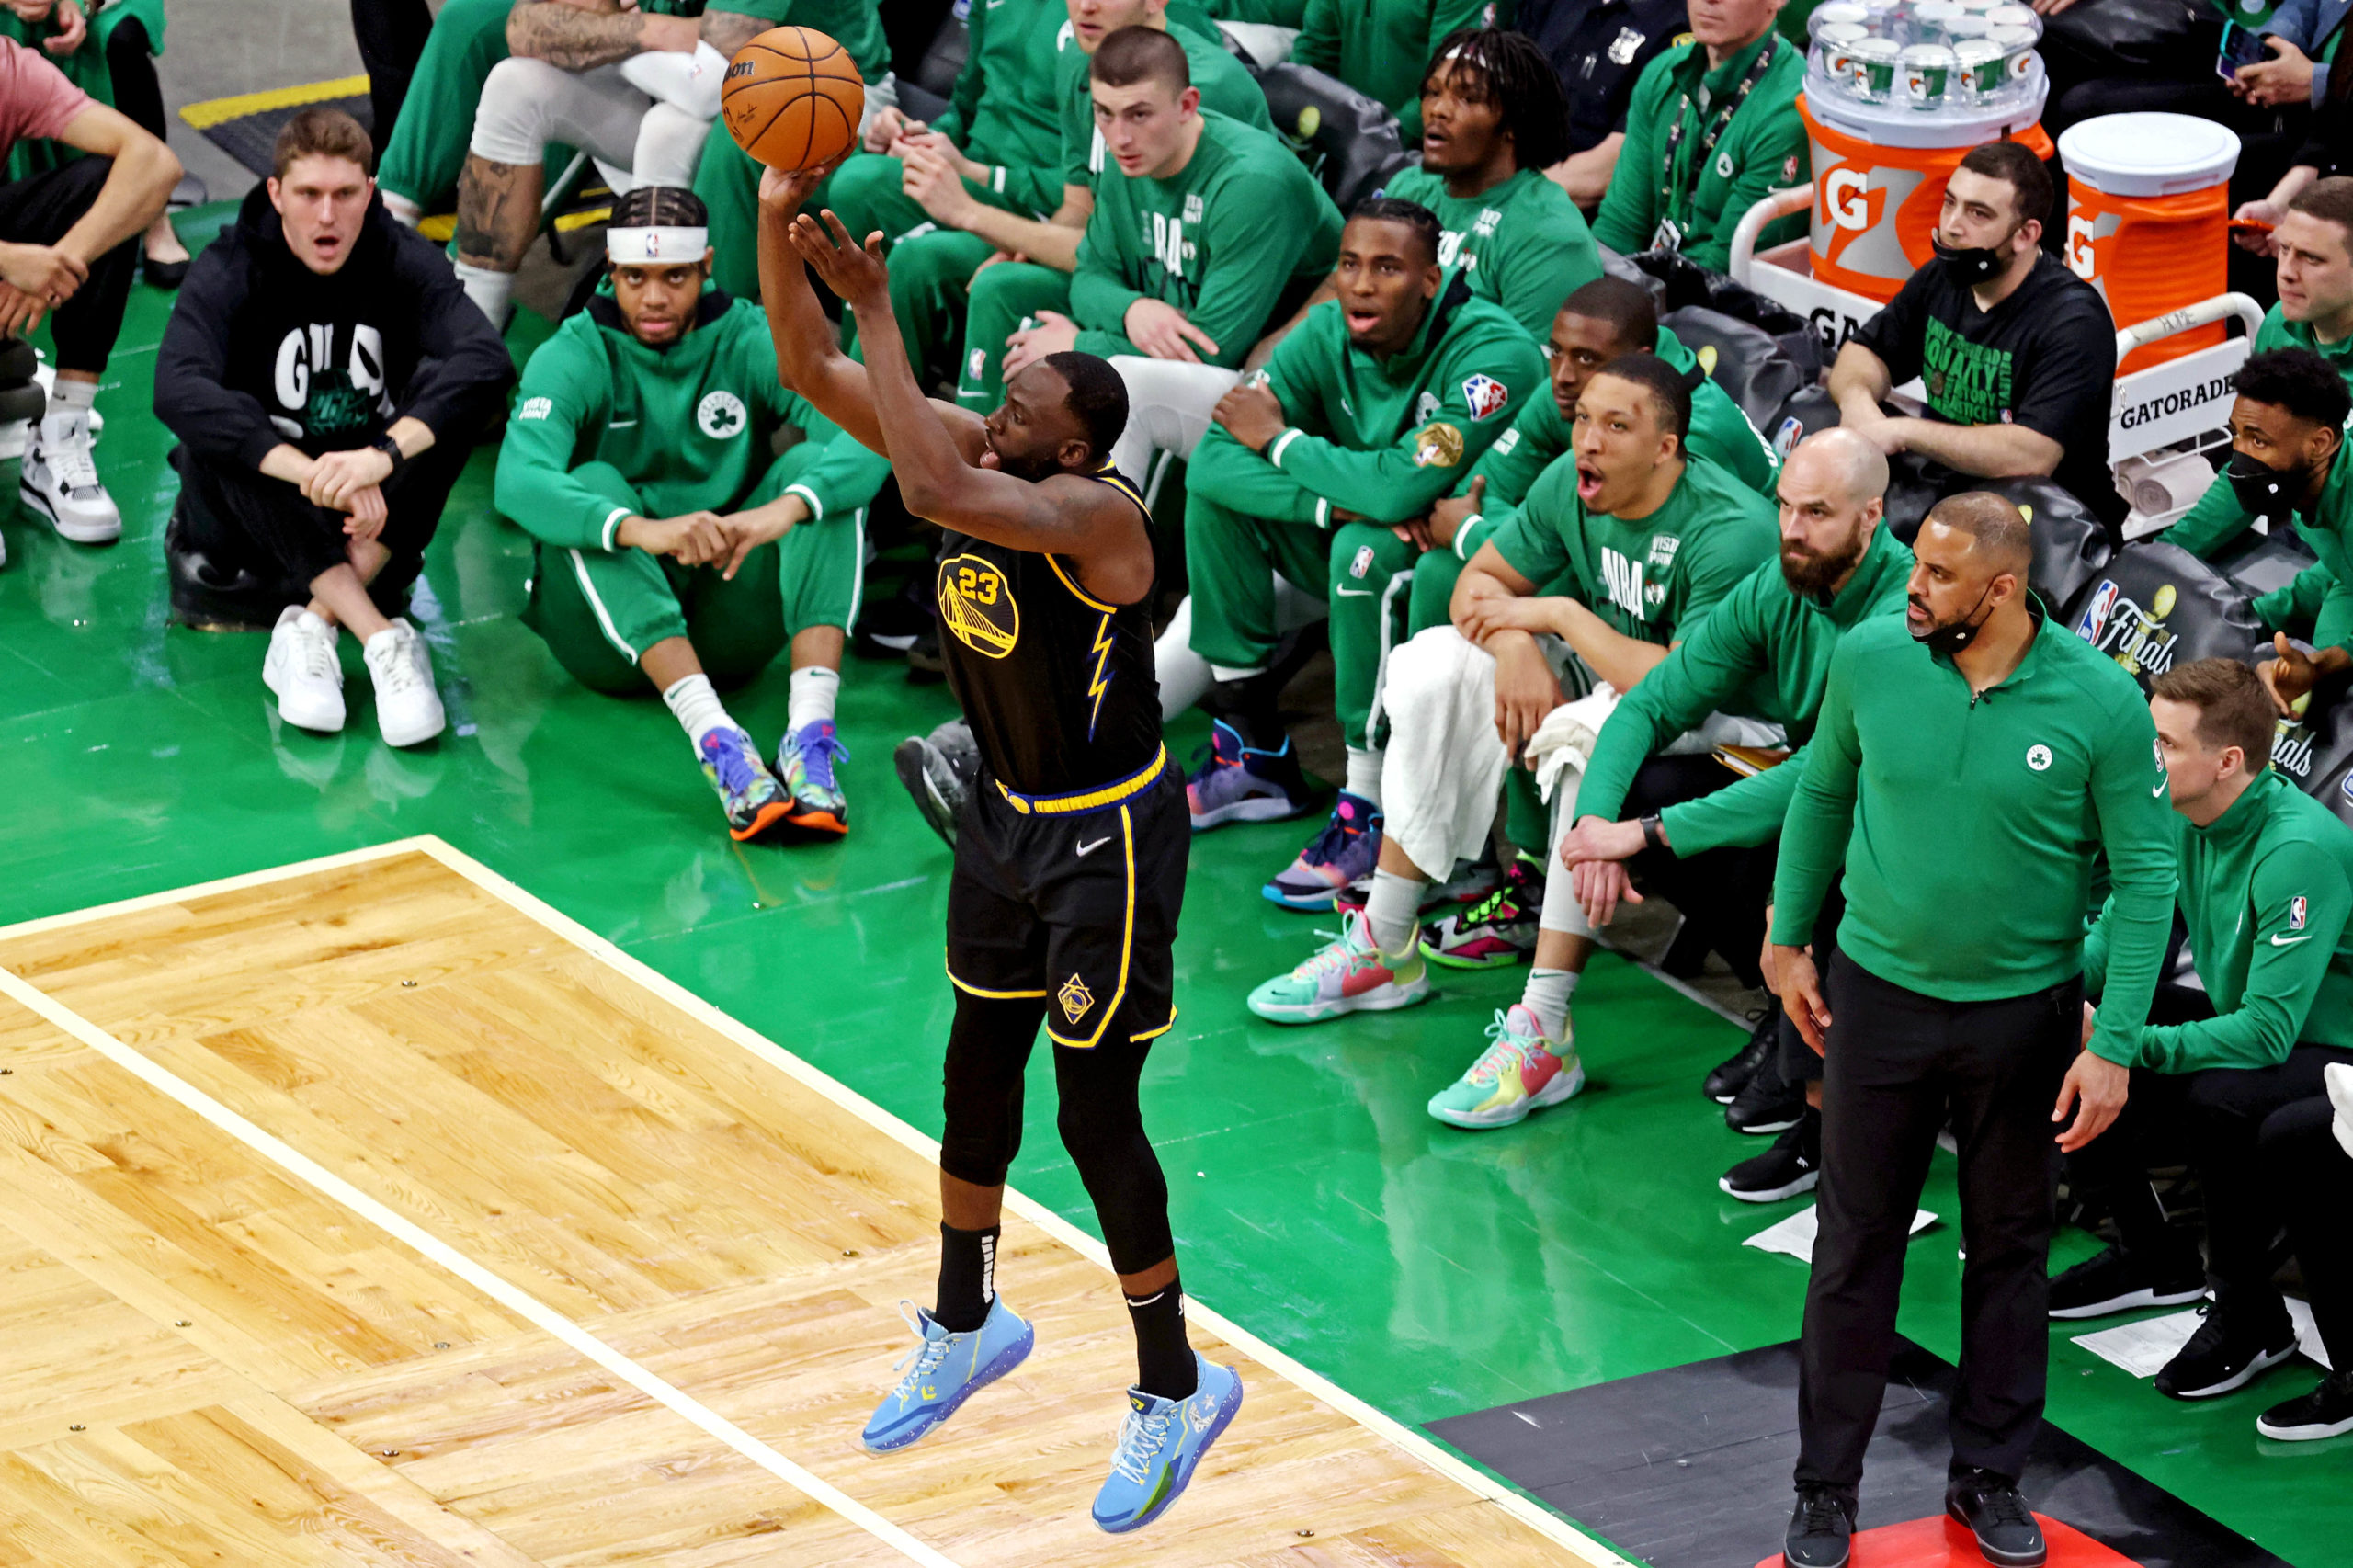 Jun 8, 2022; Boston, Massachusetts, USA; Golden State Warriors forward Draymond Green (23) shoots the ball during the third quarter against the Boston Celtics in game three of the 2022 NBA Finals at TD Garden. Mandatory Credit: Paul Rutherford-USA TODAY Sports